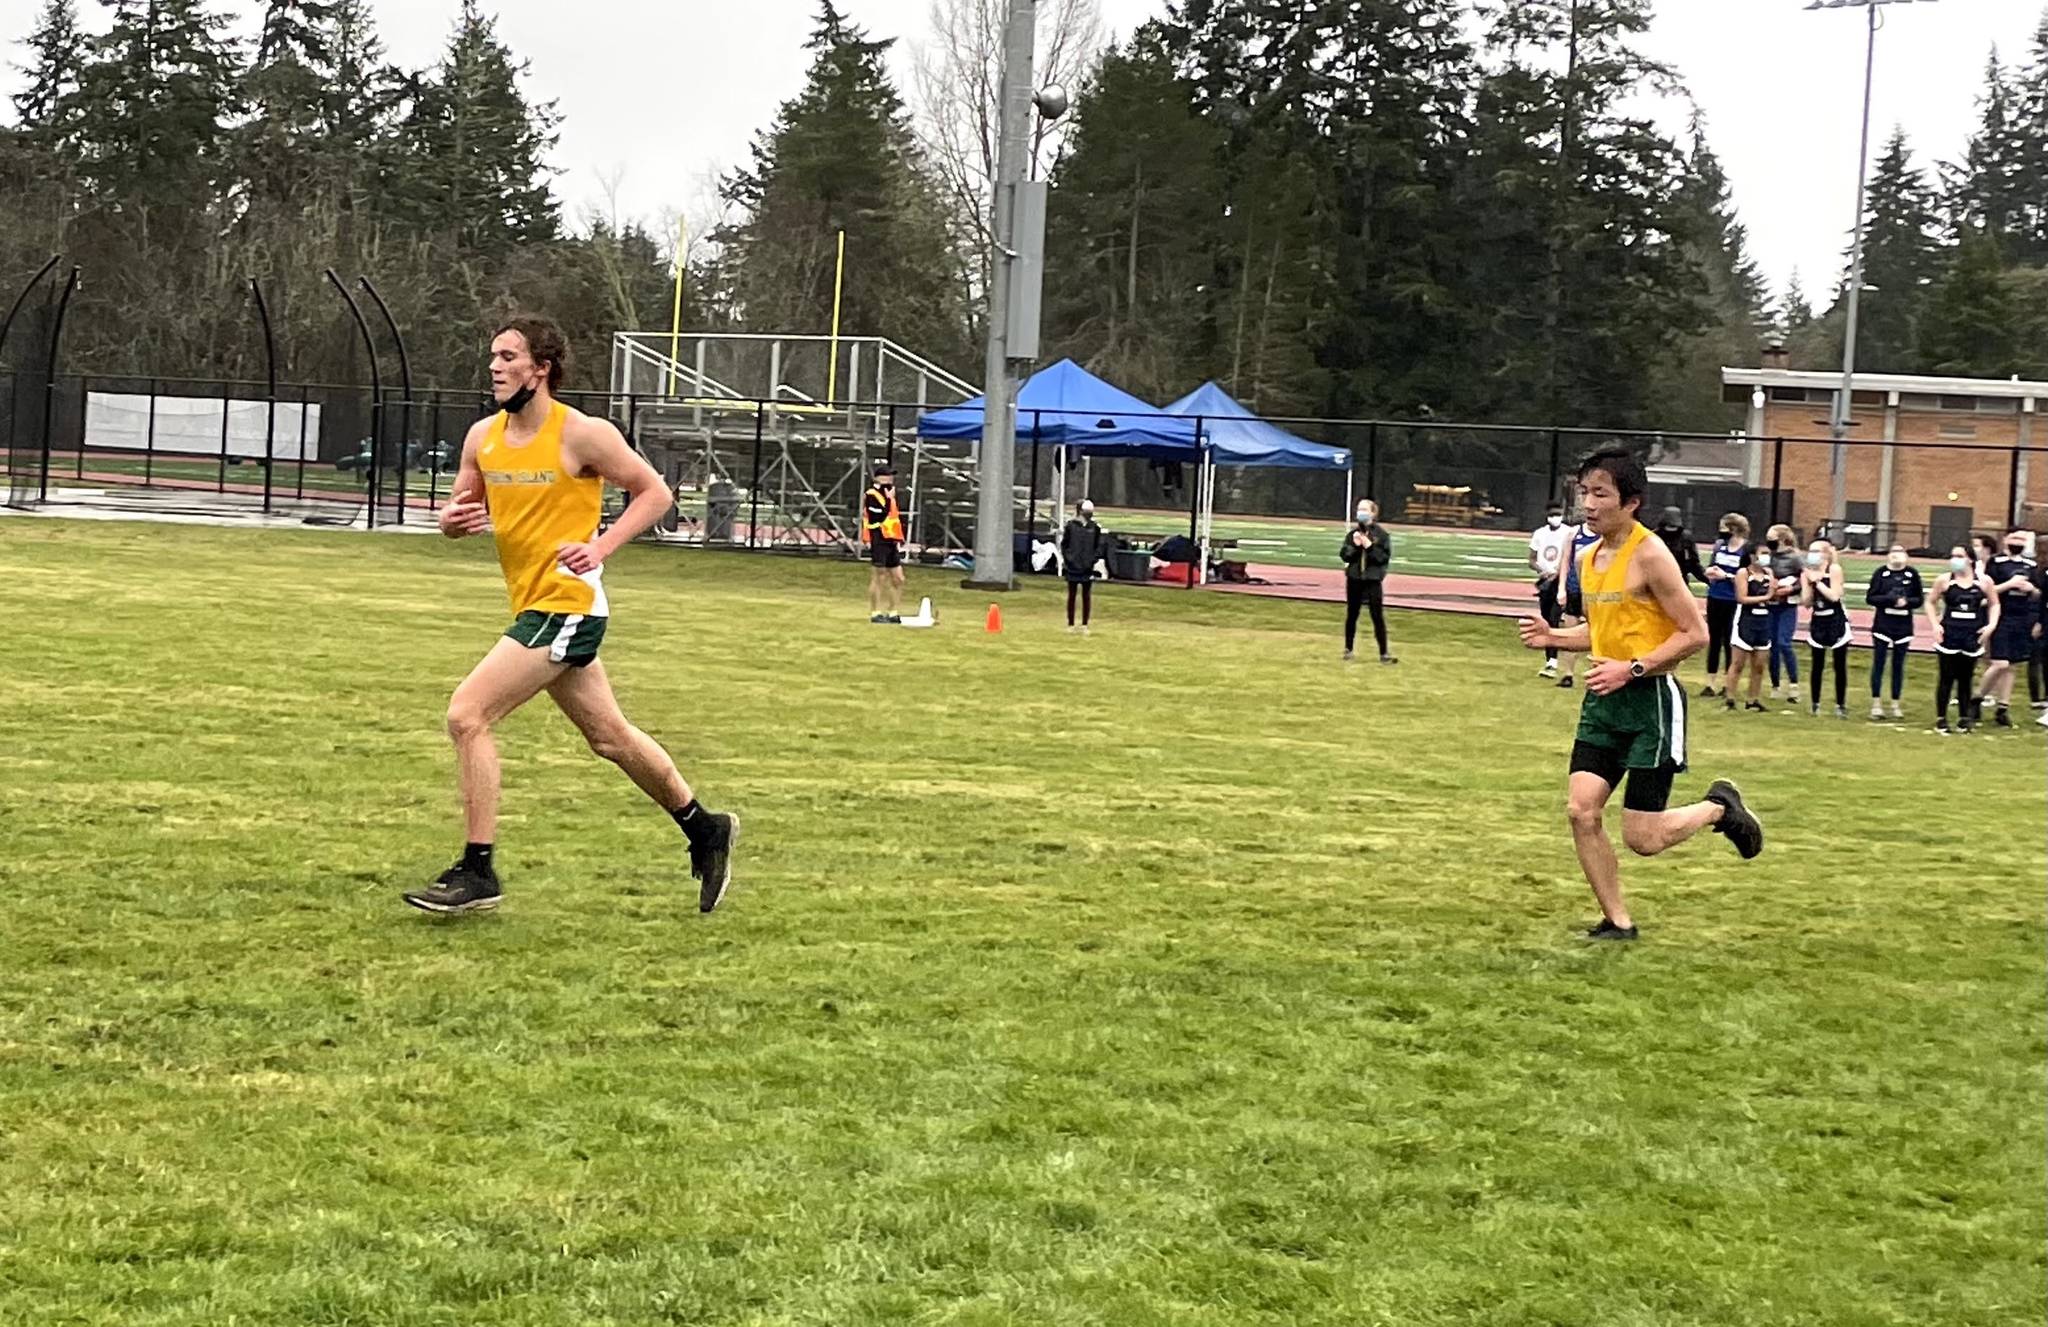 Ben Larson (left) and Levi Blasingam (right) running through the muddy grass on their second loop of the cross-country course, which was modified to allow for social distancing.